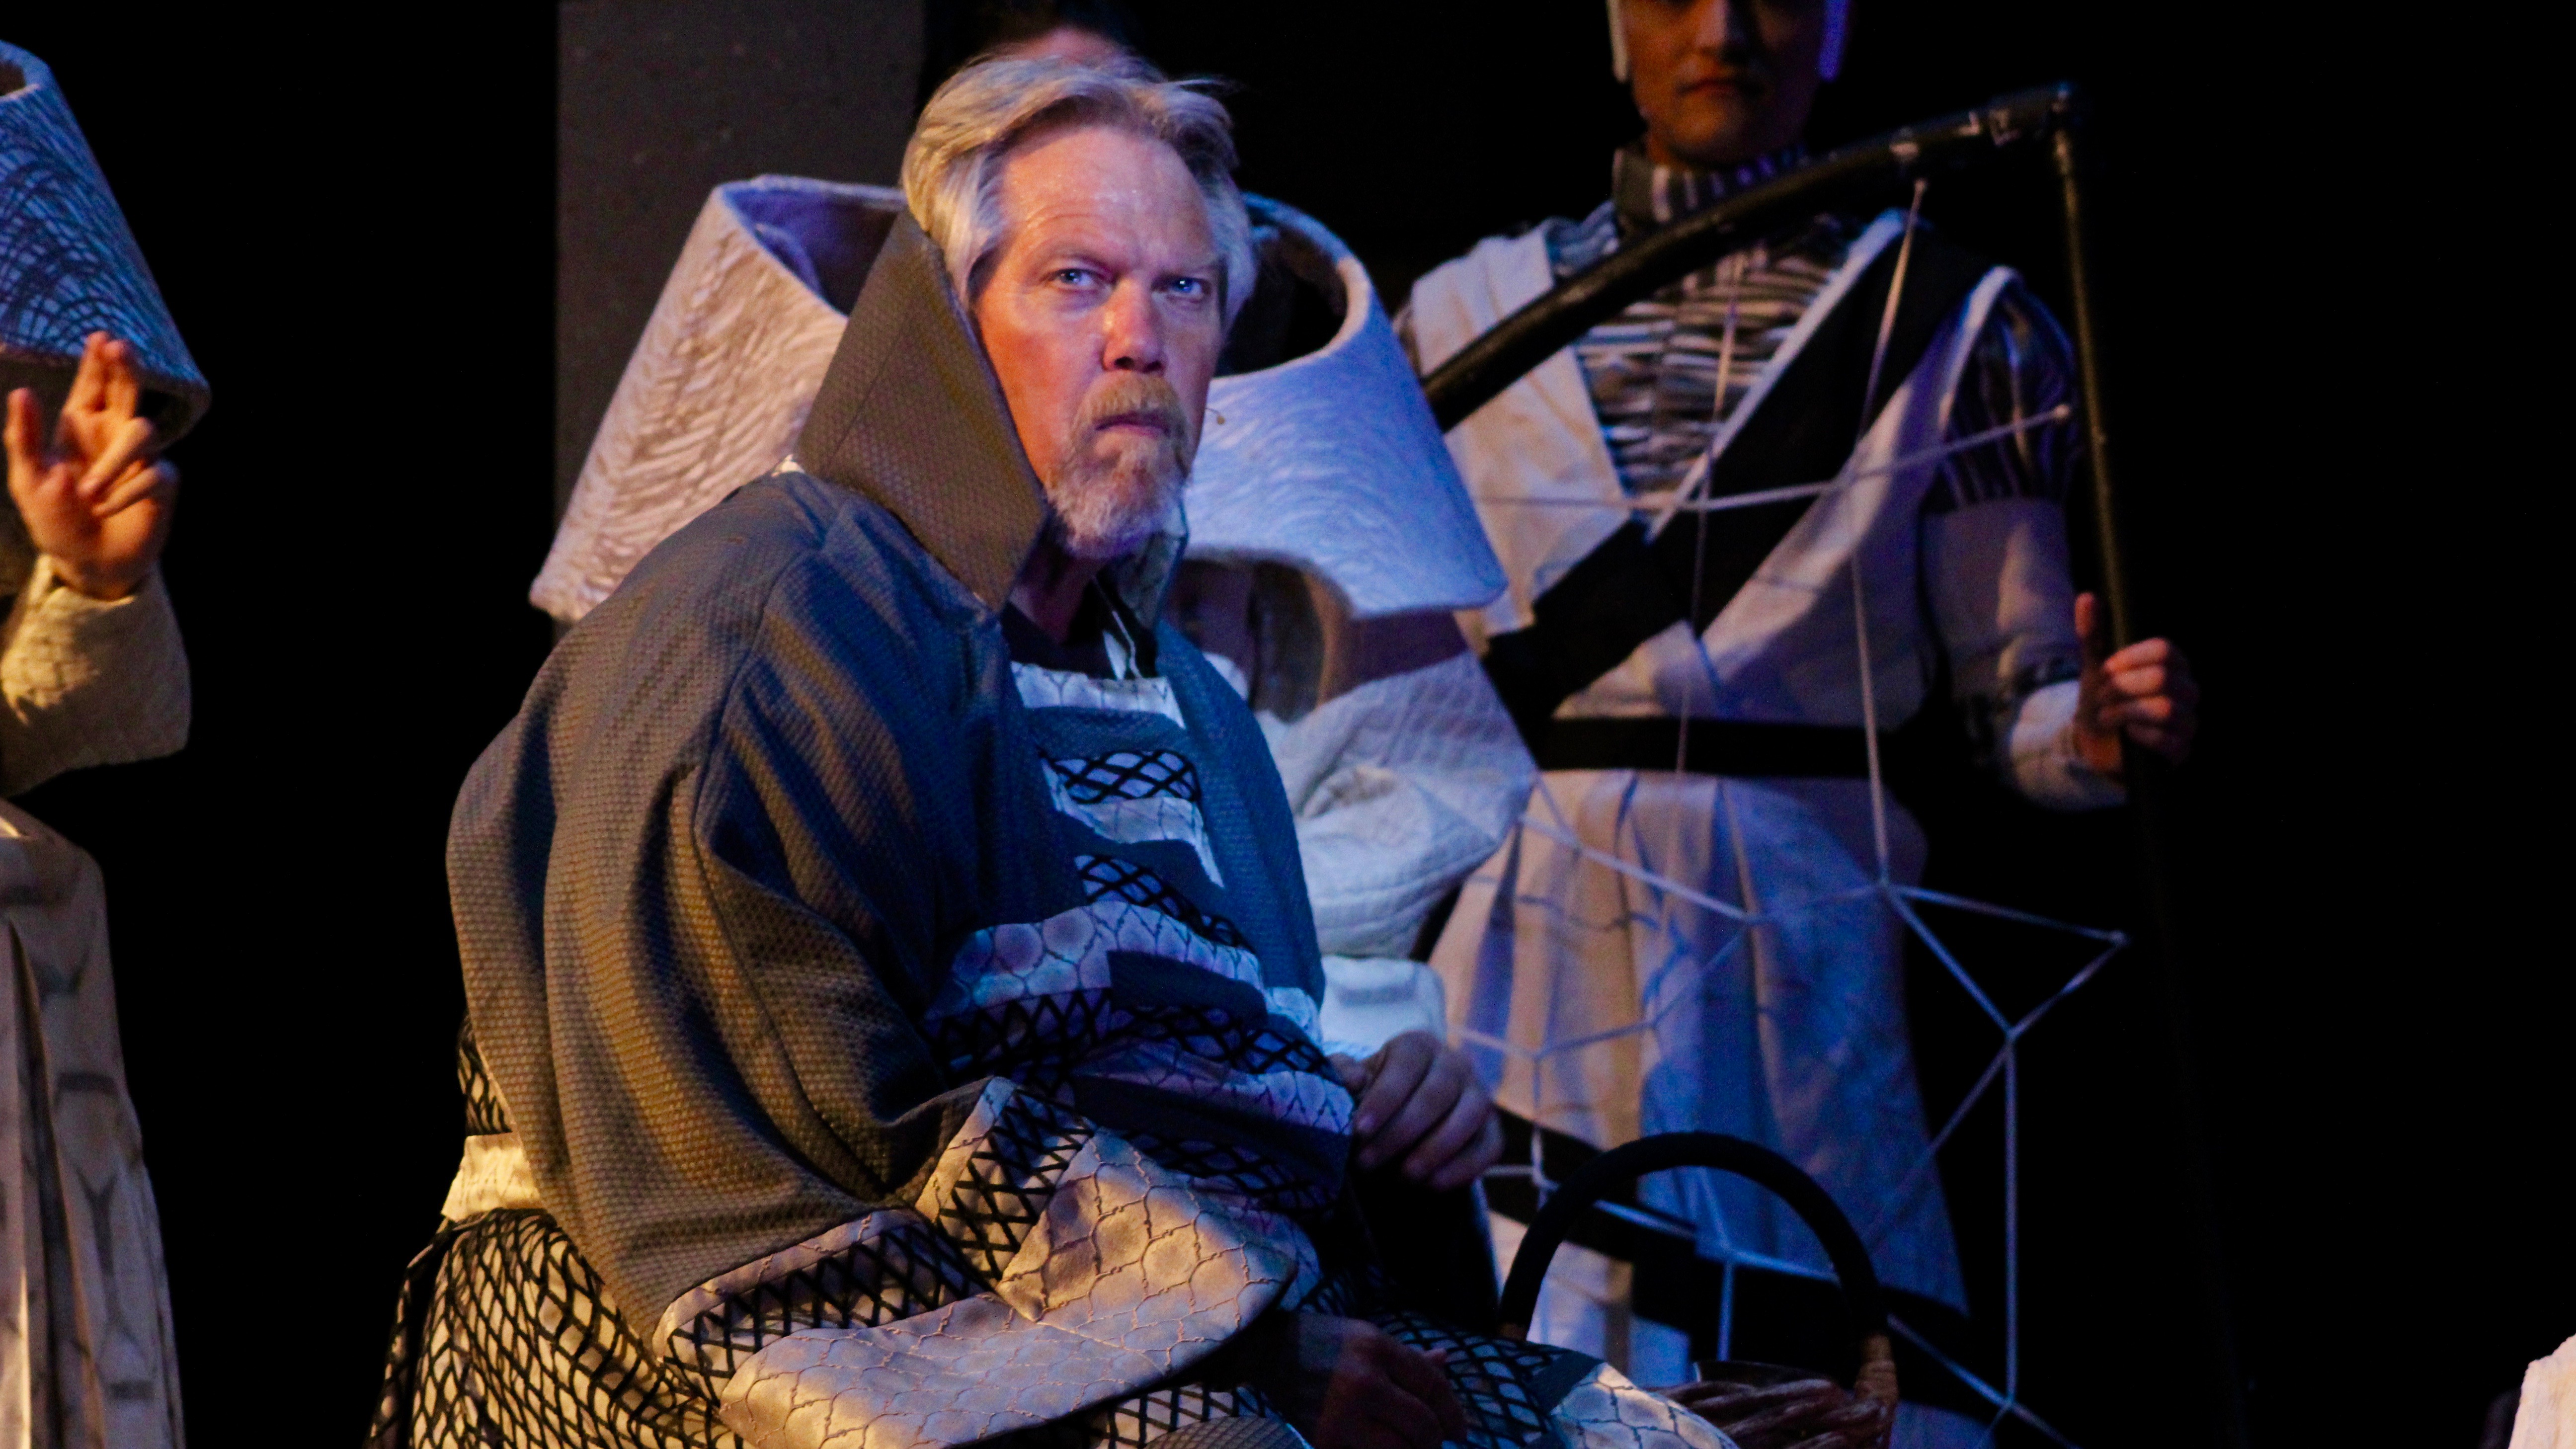 Man in robes stares at audience during a rehearsal for the Hunchback of Notre Dame.